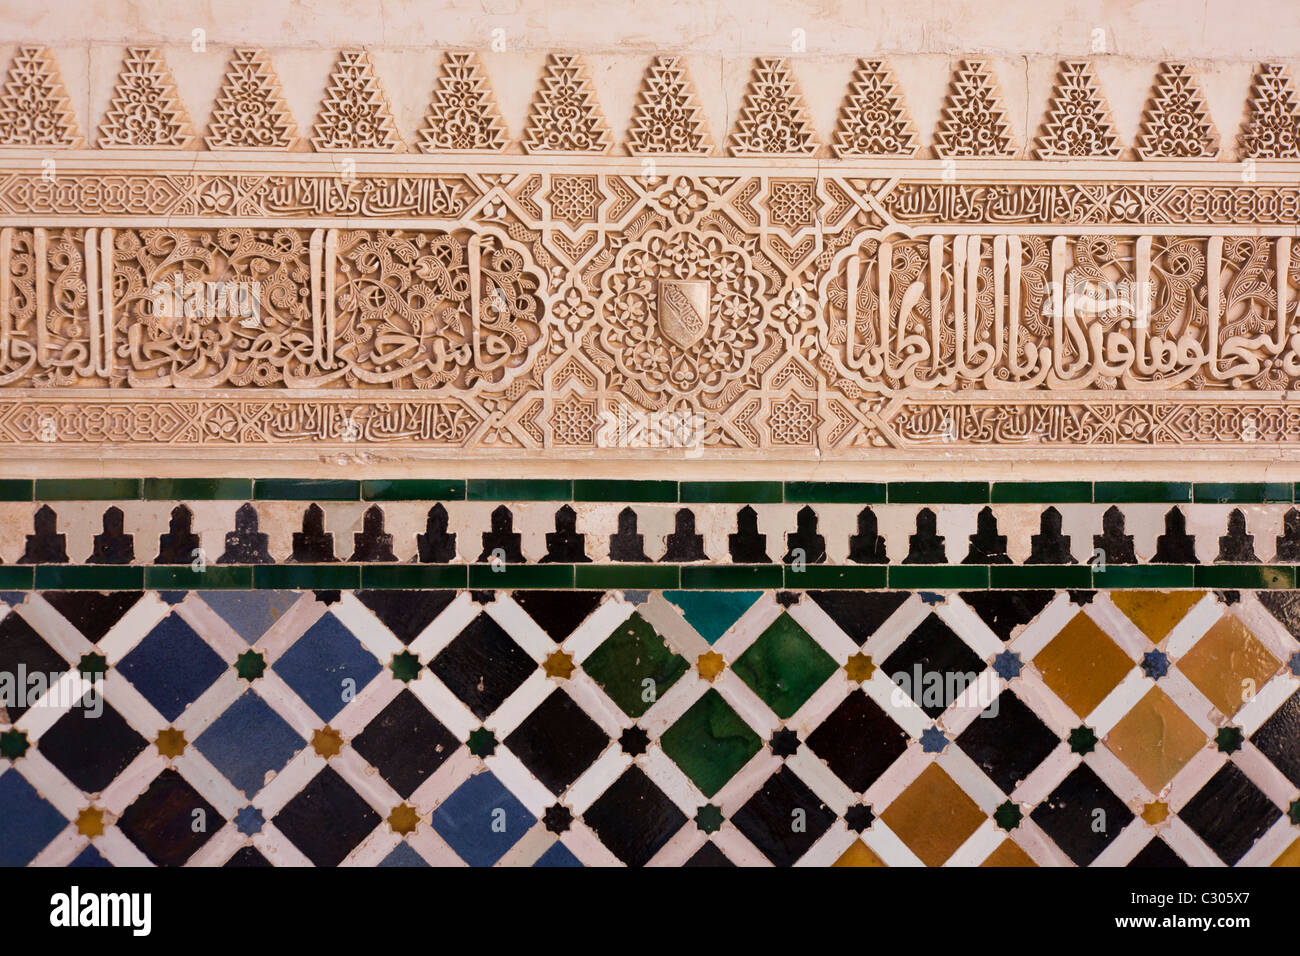 Ornate architectural artwork on courtyard walls of Nasrid Palace Stock Photo